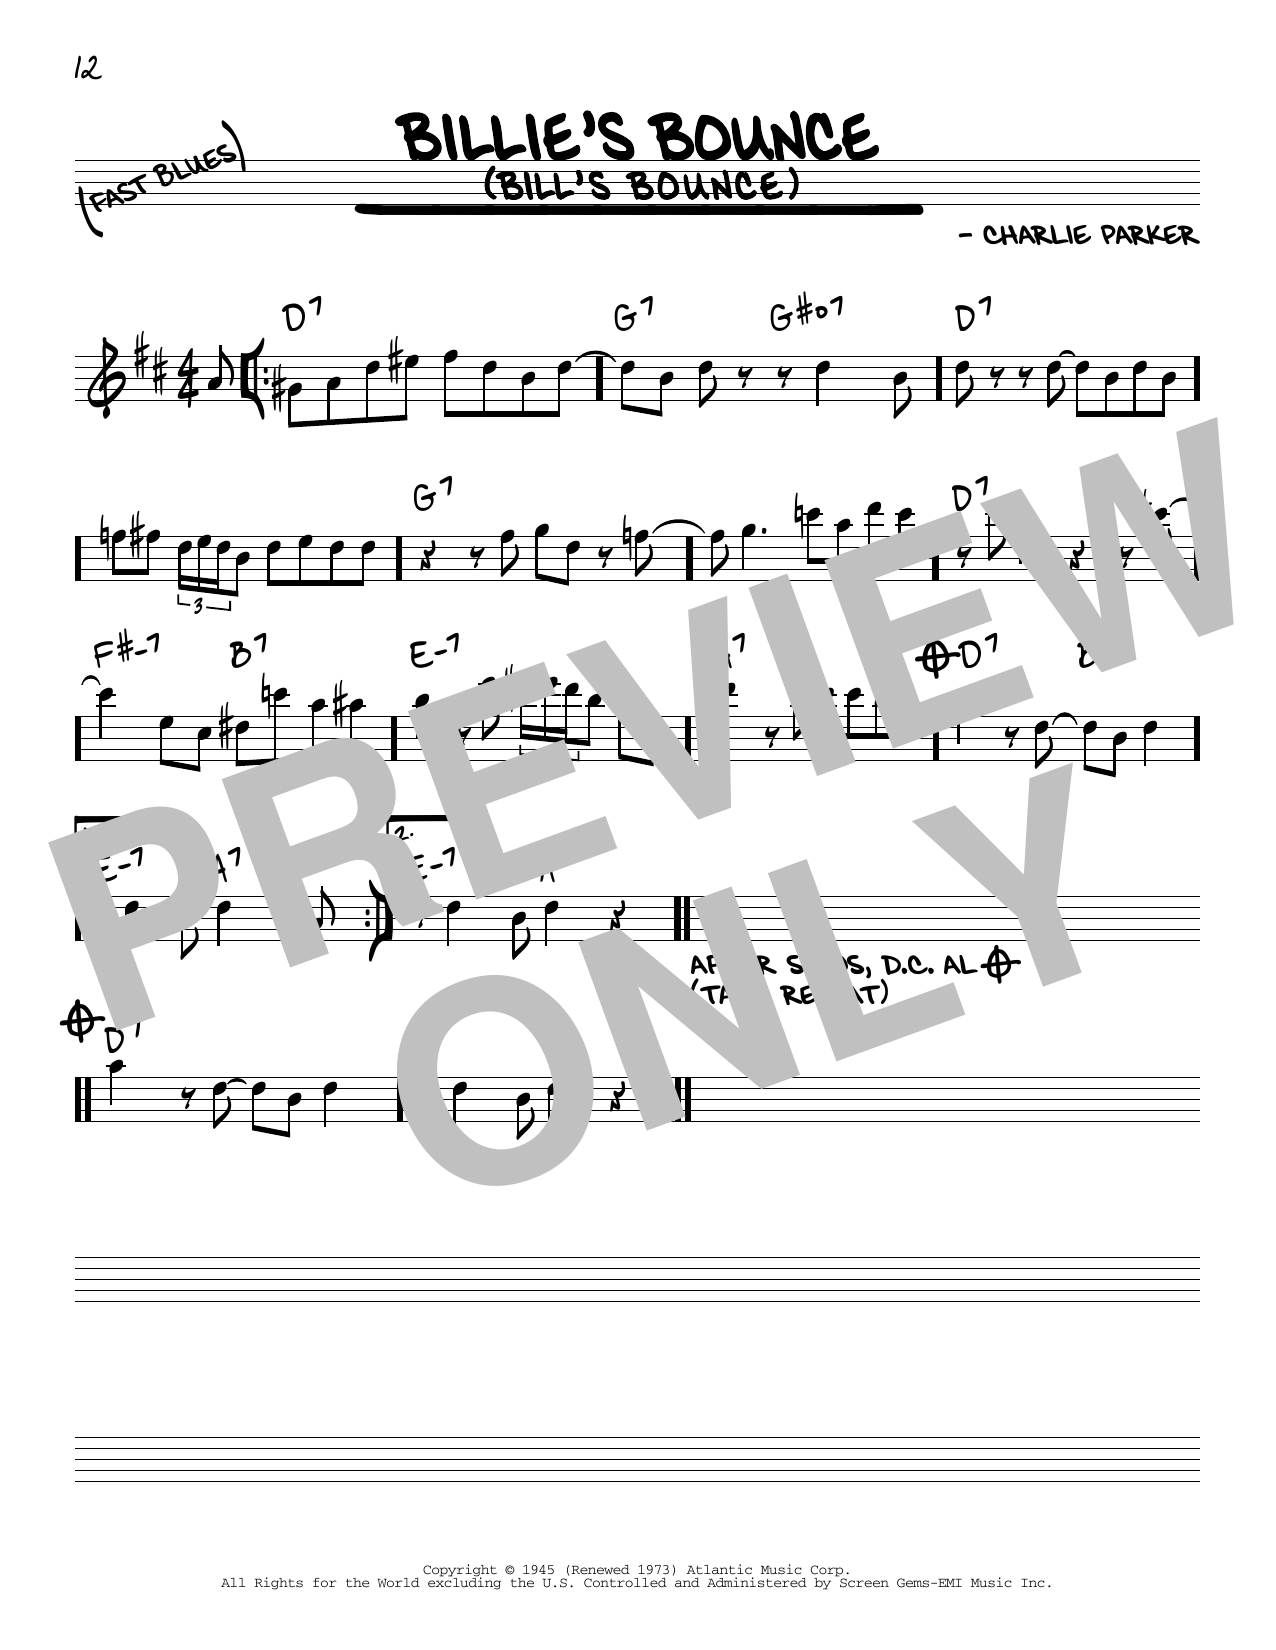 Charlie Parker Billie's Bounce (Bill's Bounce) sheet music notes and chords. Download Printable PDF.